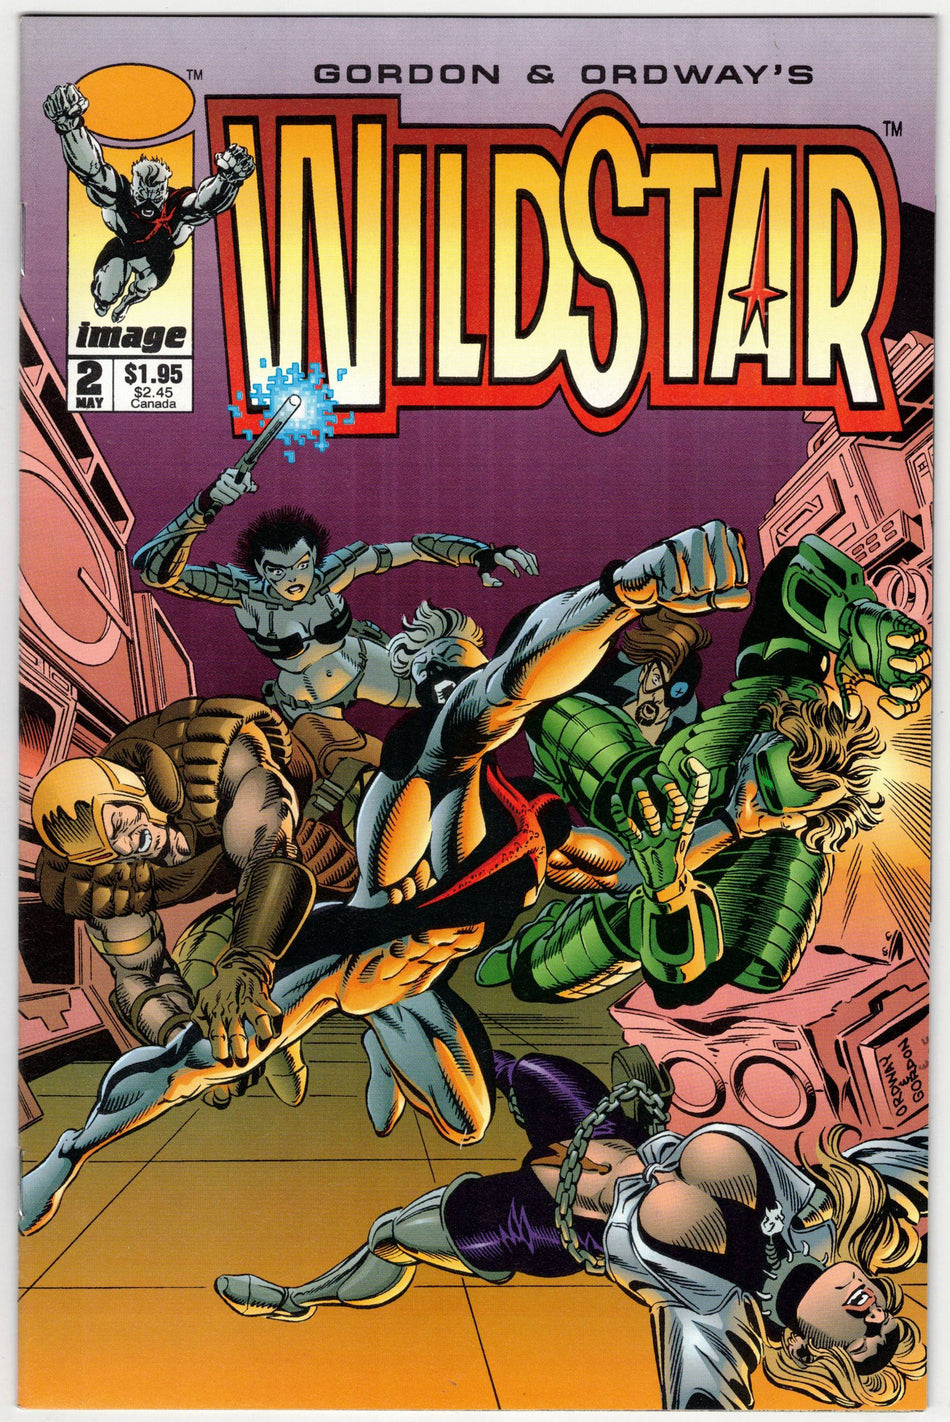 Photo of Wildstar: Sky Zero (1993) Issue 2 - Comic sold by Stronghold Collectibles